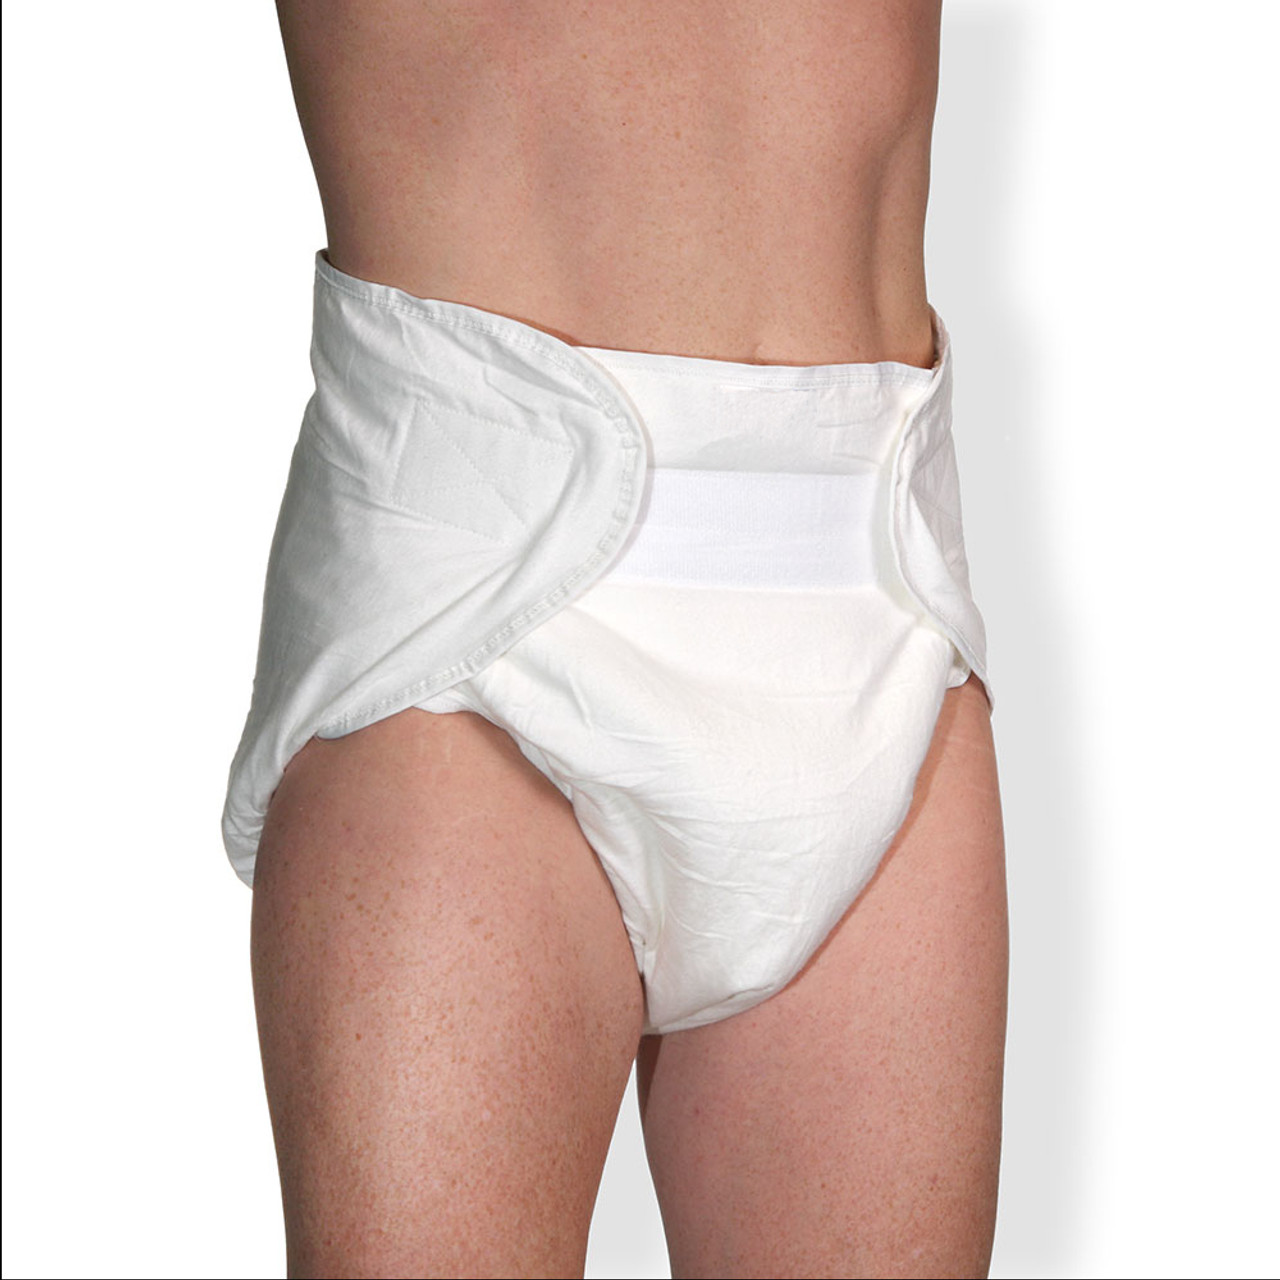 Fusipu Reusable Adjustable Adult Cloth Diaper Nappy Pants for Incontinence  Bedwetting